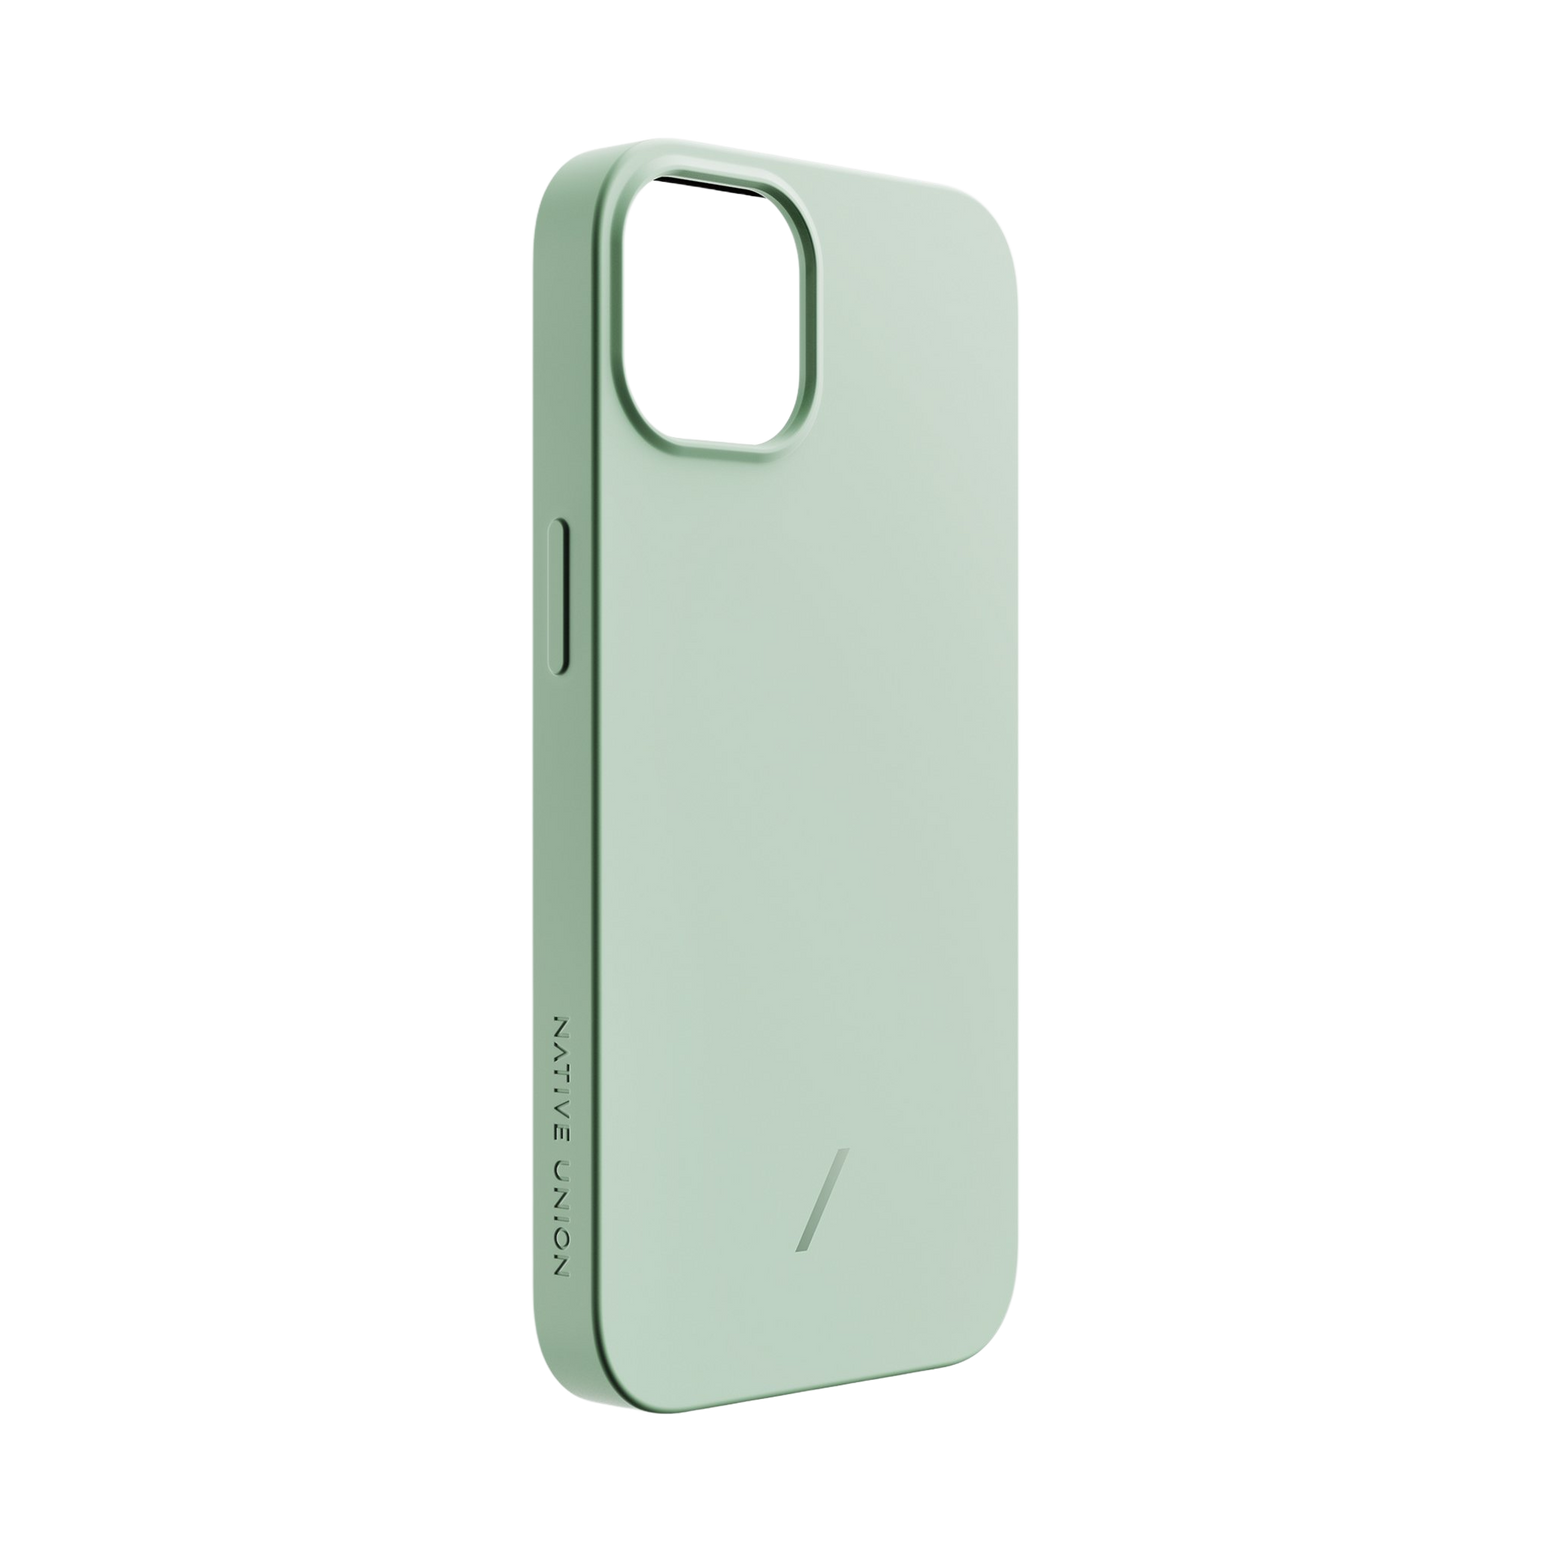 Native Union Clic Pop Case for iPhone 13 - Sage - Discontinued